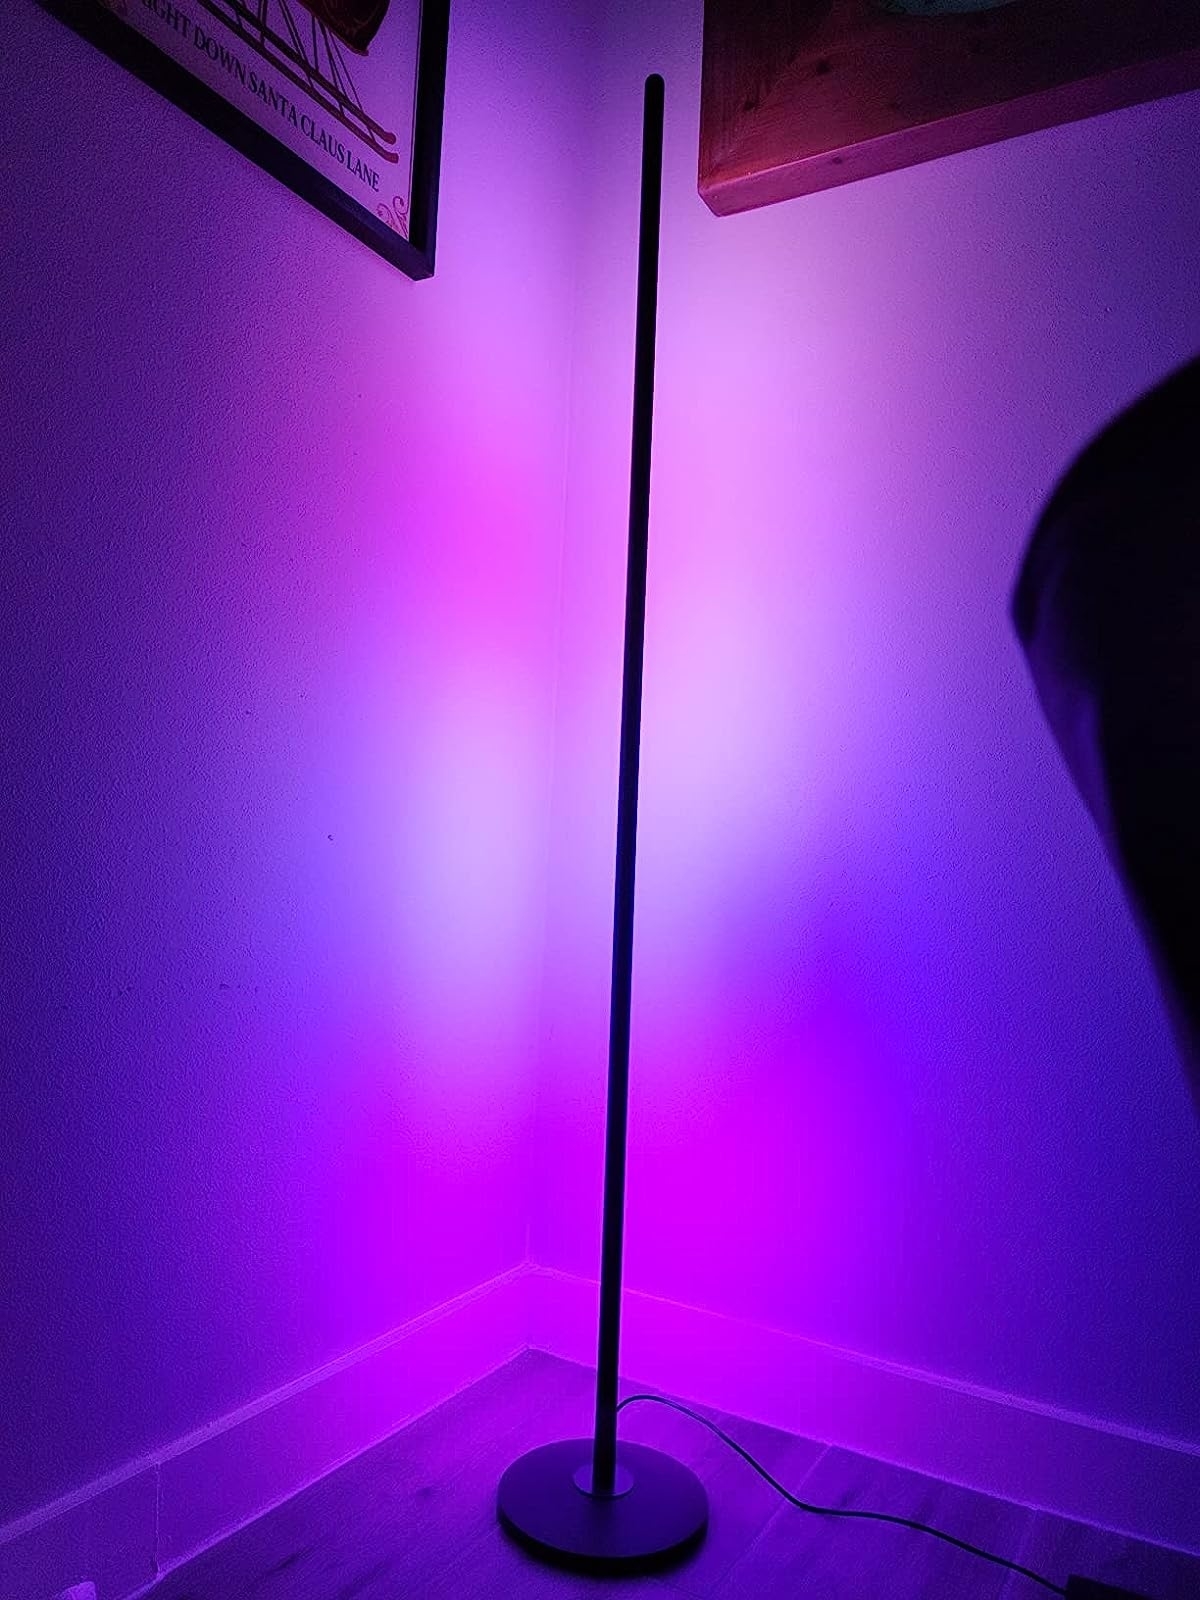 the black rod shaped lamp in a corner showing several shades of purple light